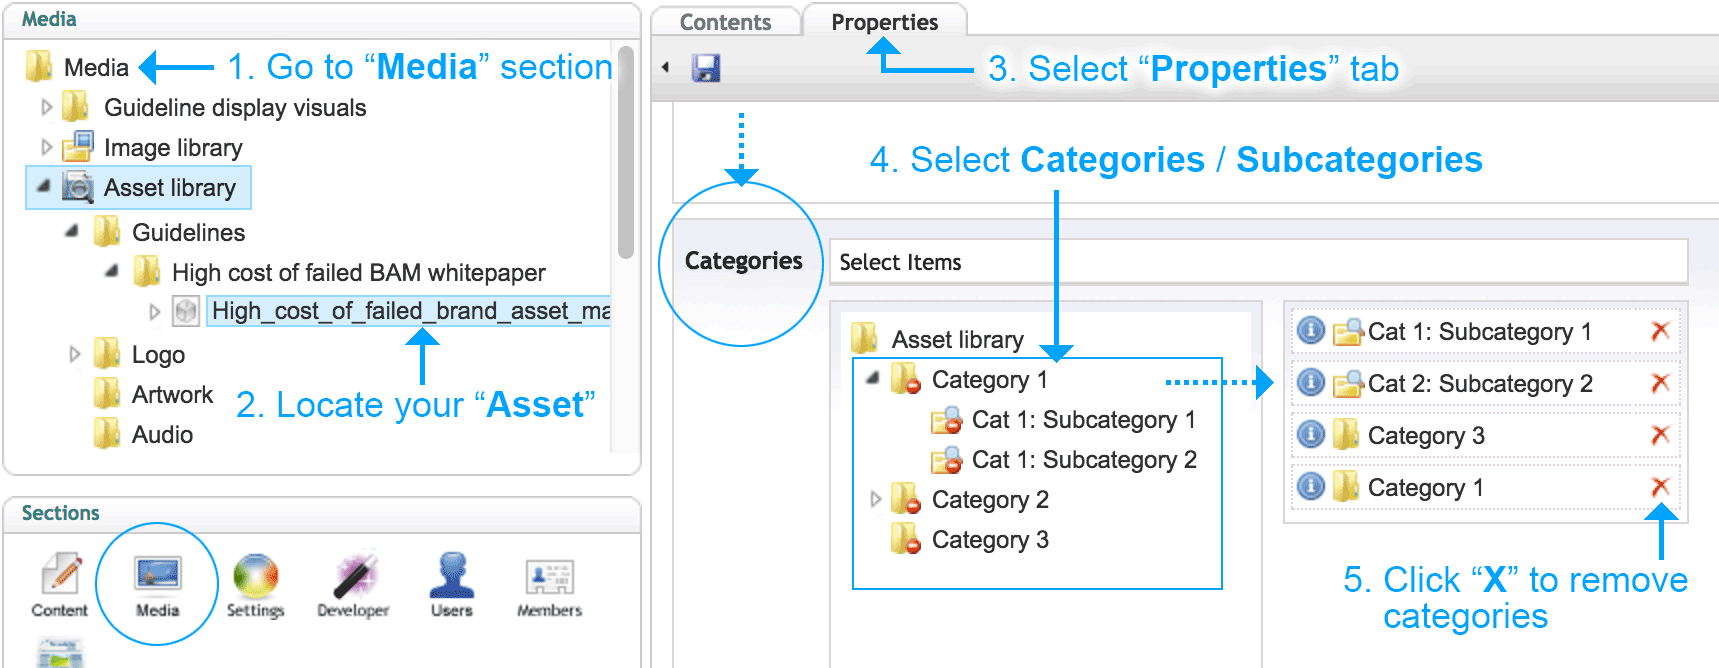 Assigning categories and subcategories to assets